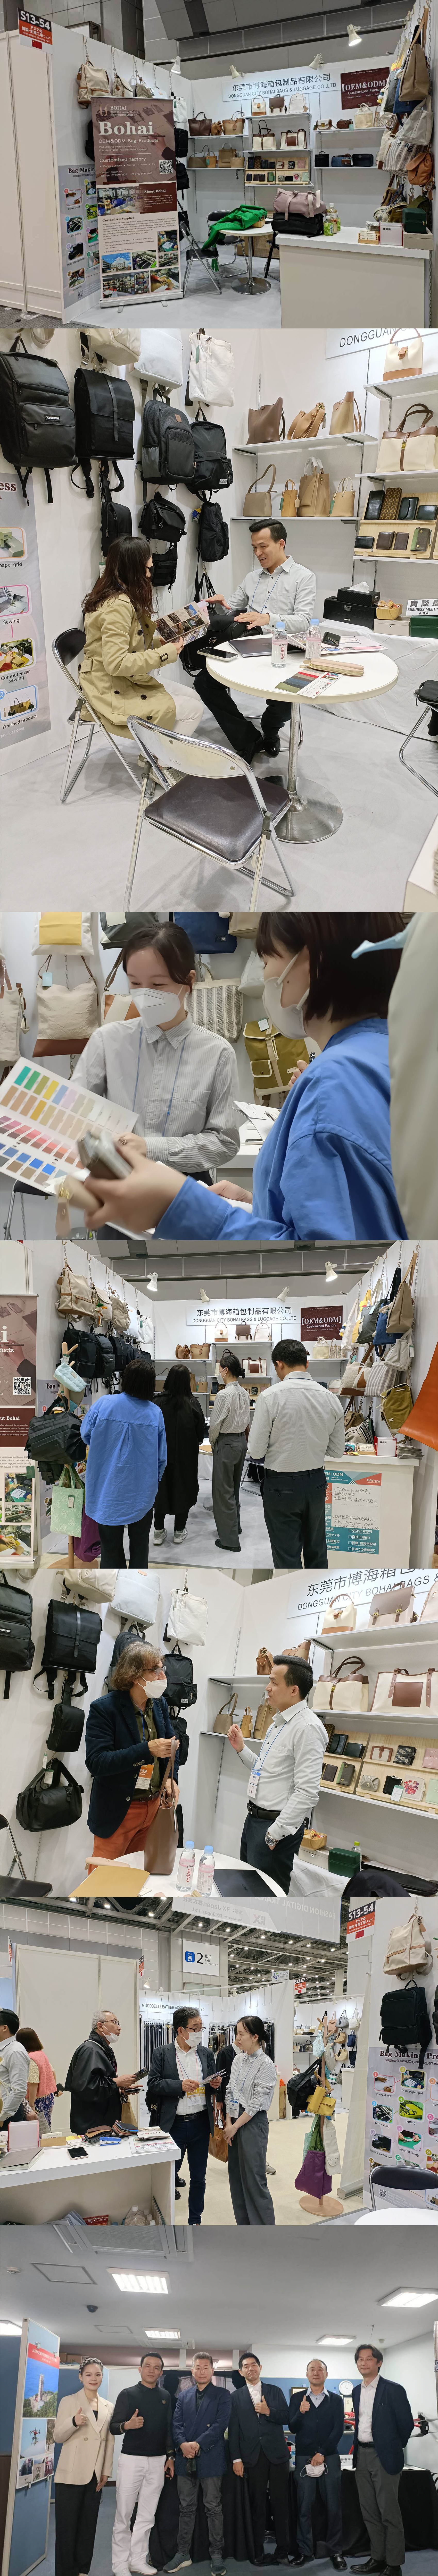 Many people came to our booth for consultation in the Tokyo Exhibition in Japan